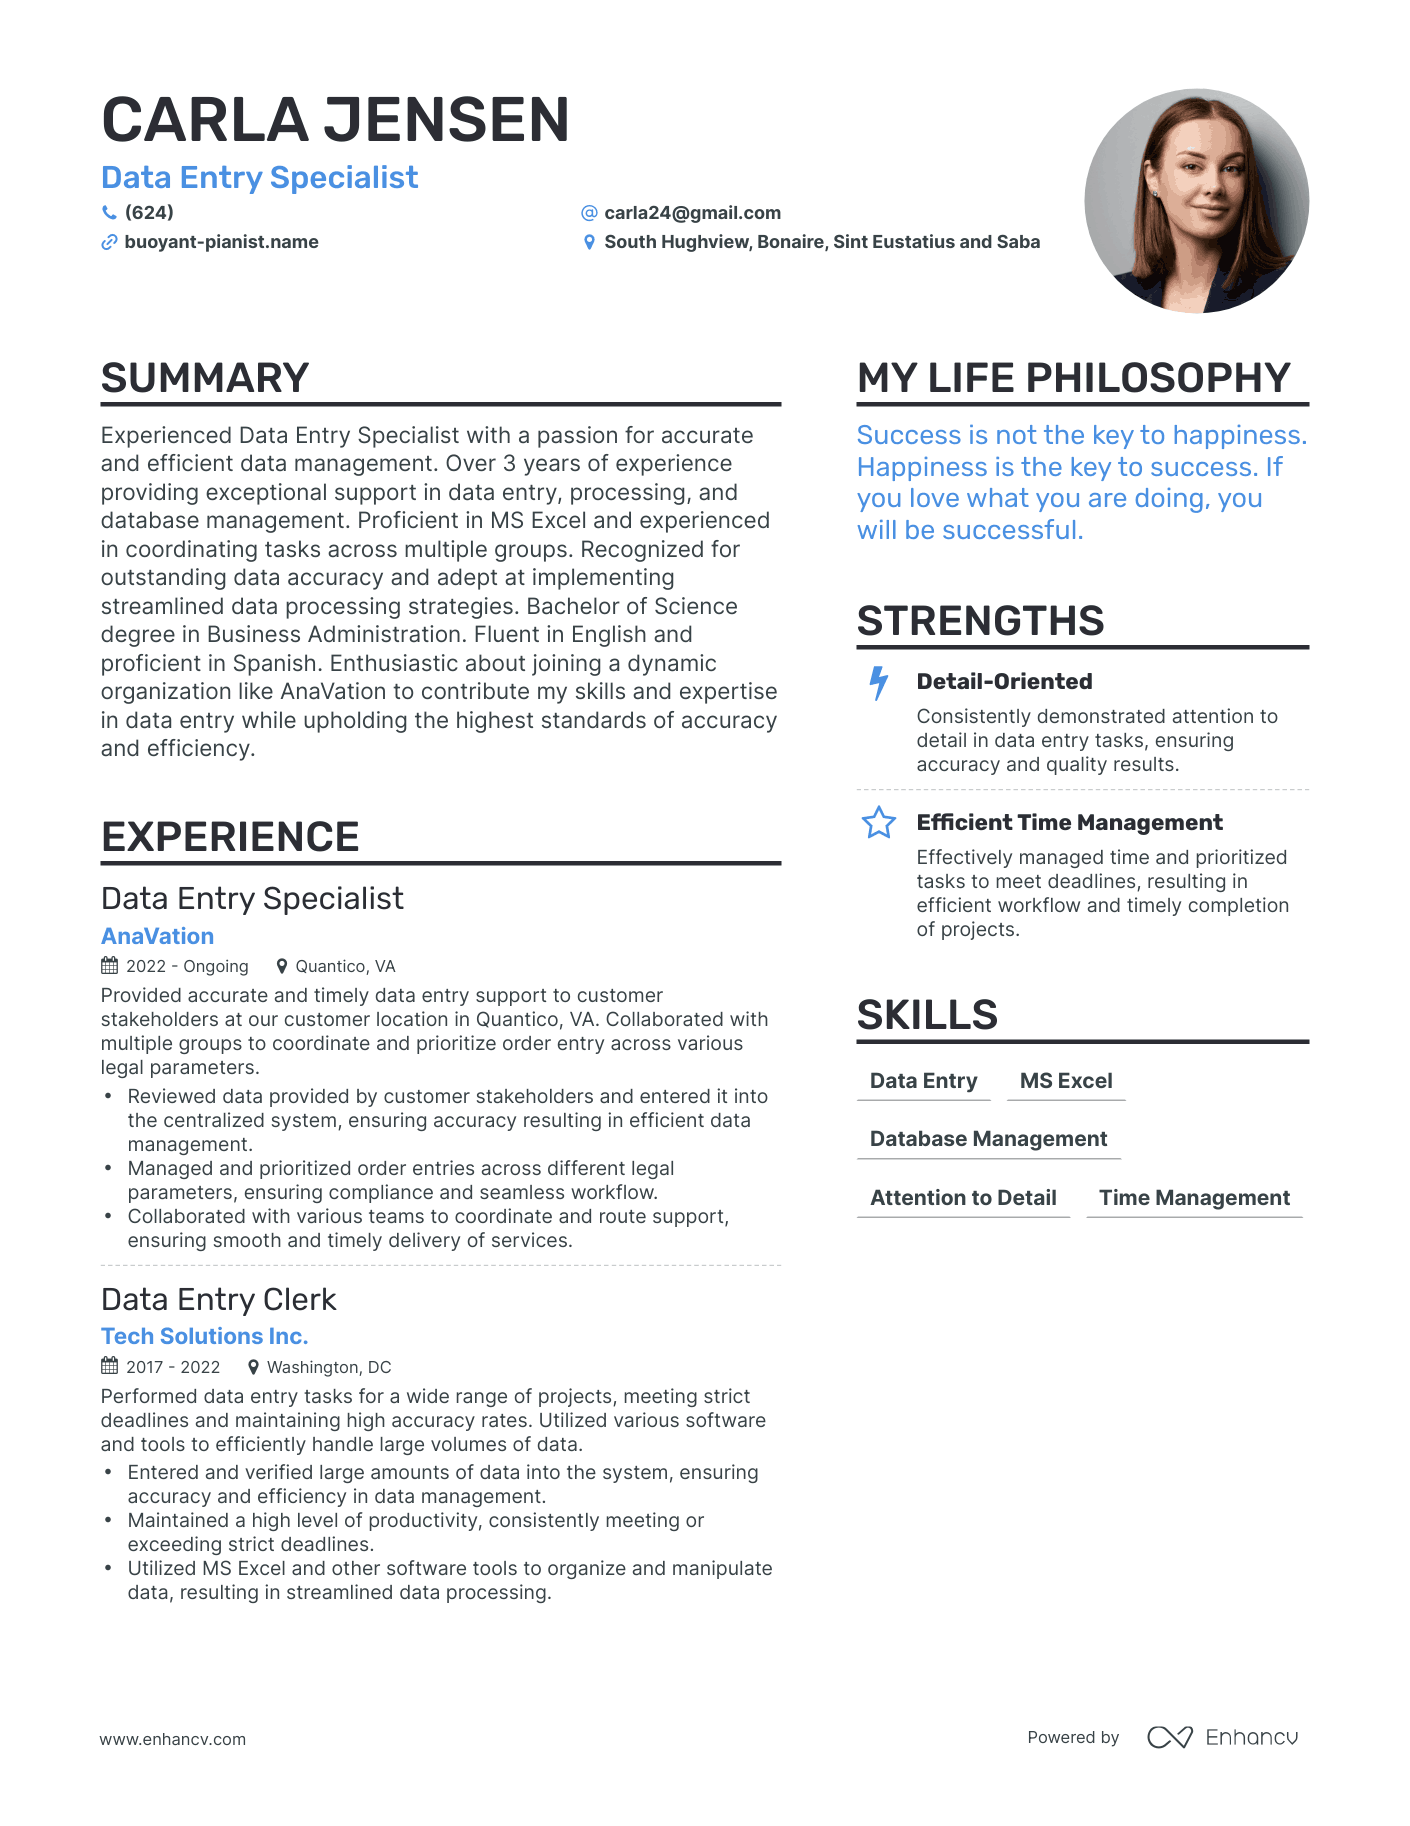 Data Entry Specialist resume example